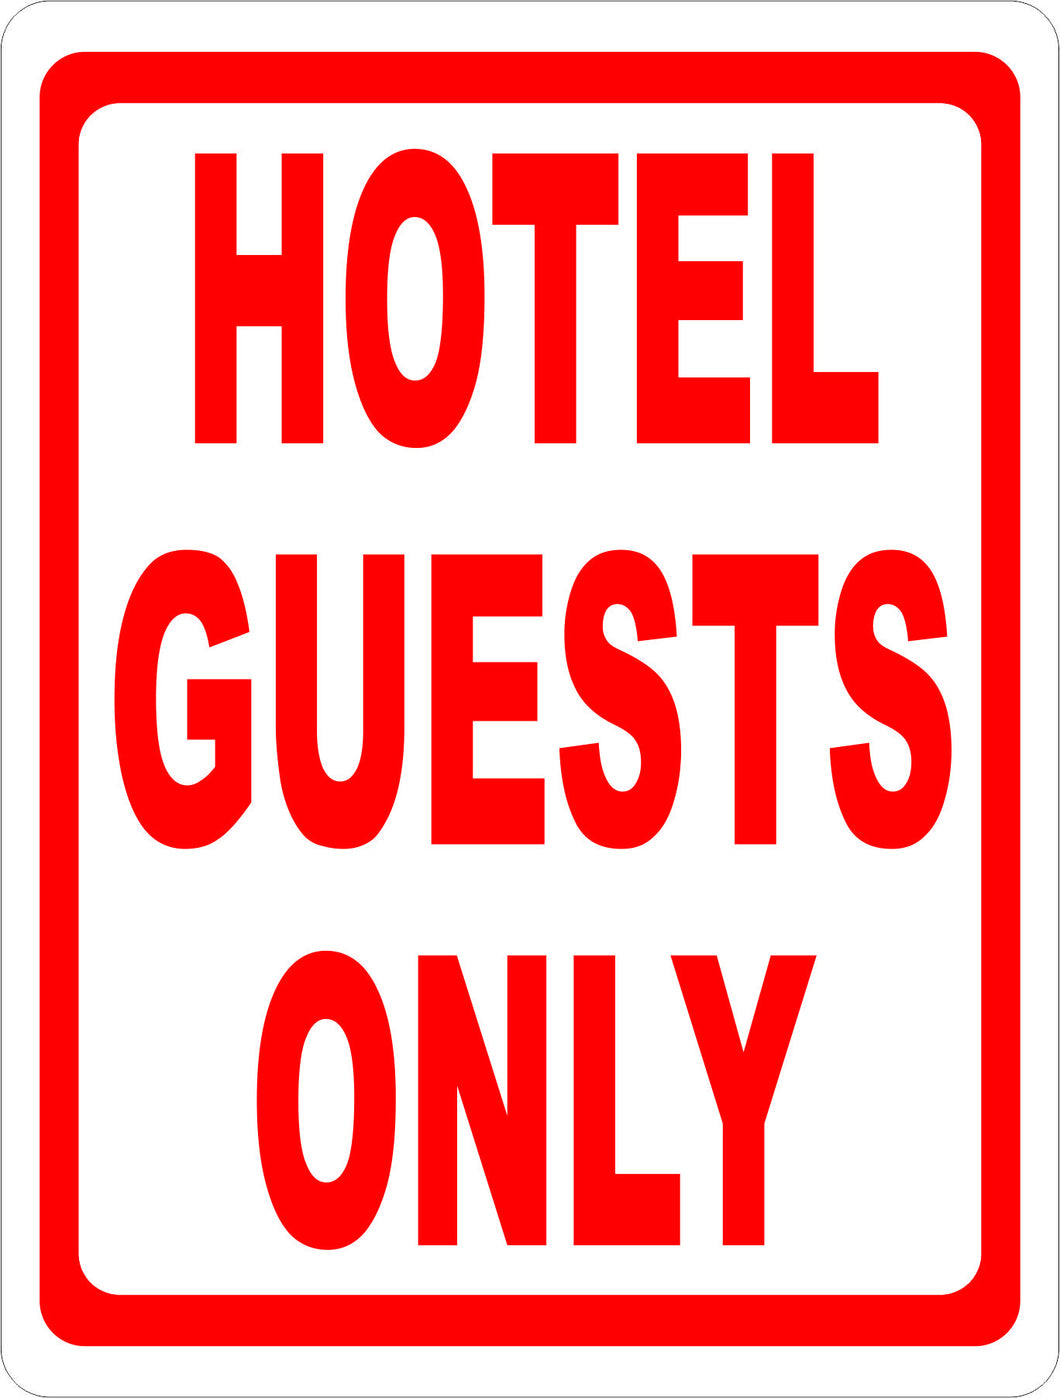 Hotel Guests Only Sign Signs By Salagraphics 1134